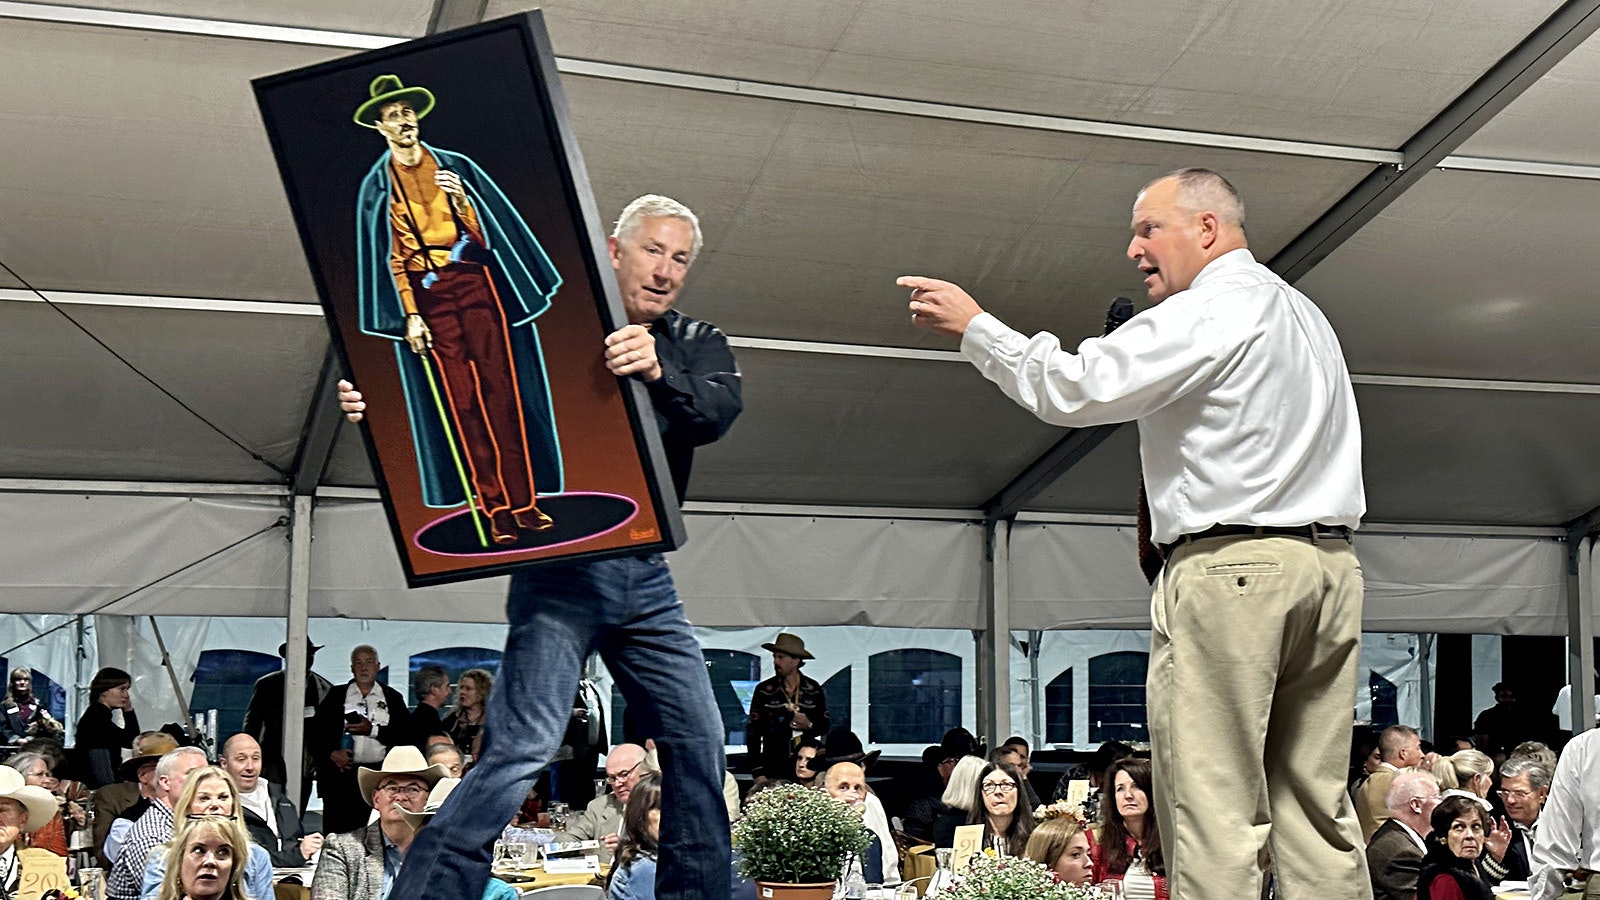 Auctioneer Troy Black auctions off the painting "You're a Daisy if You Do" by Michael Blessing during the 42nd Buffalo Bill Art Show and Sale Live Auction. The piece sold for $8,500.